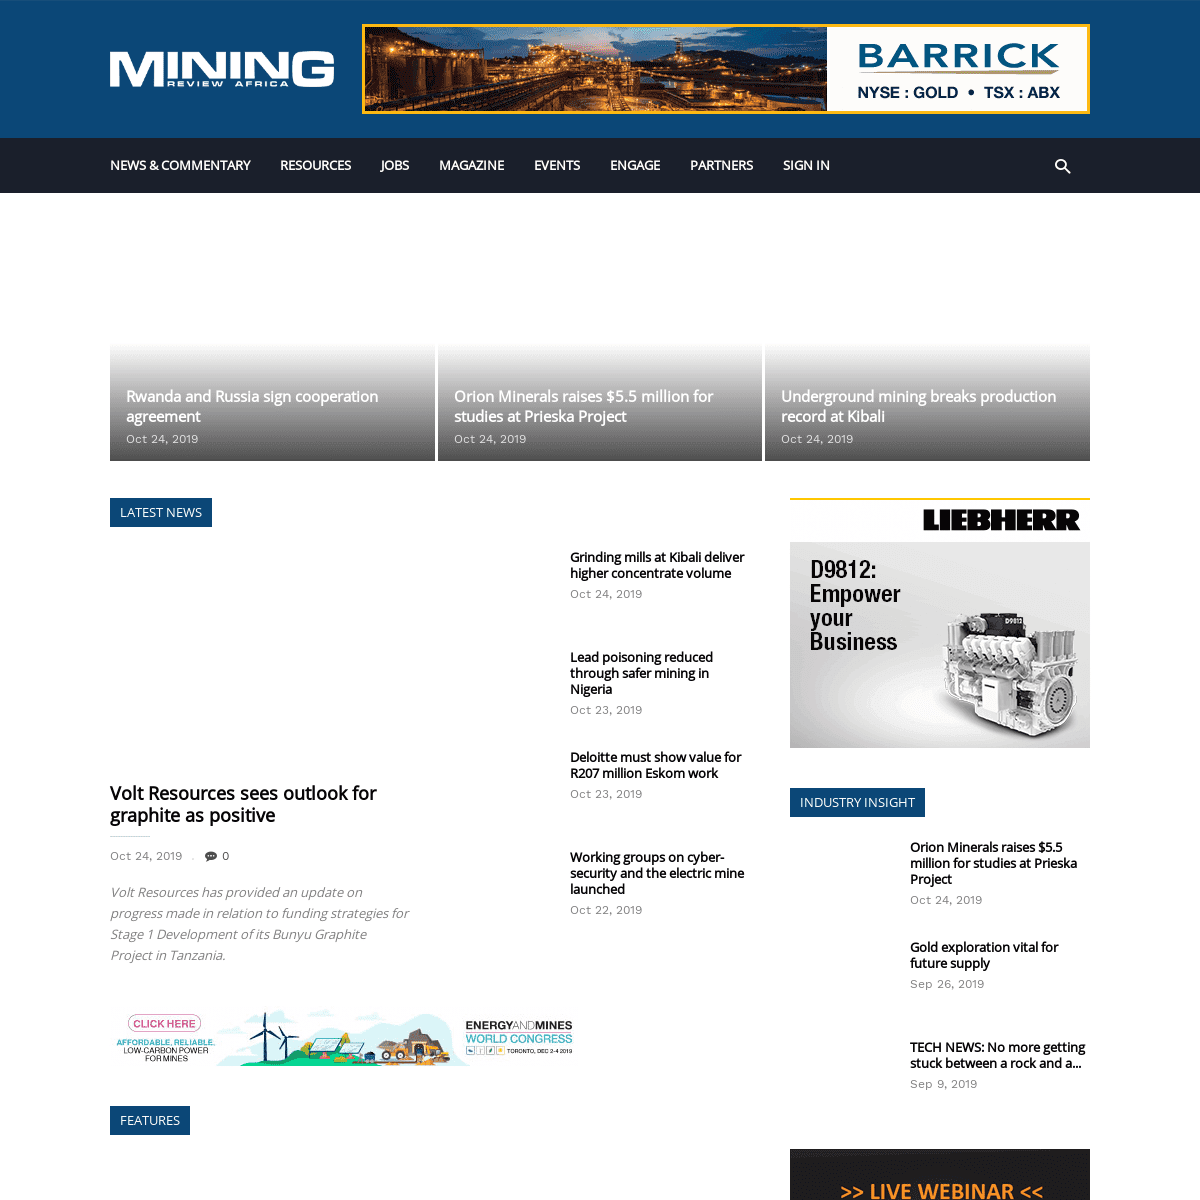 A complete backup of miningreview.com